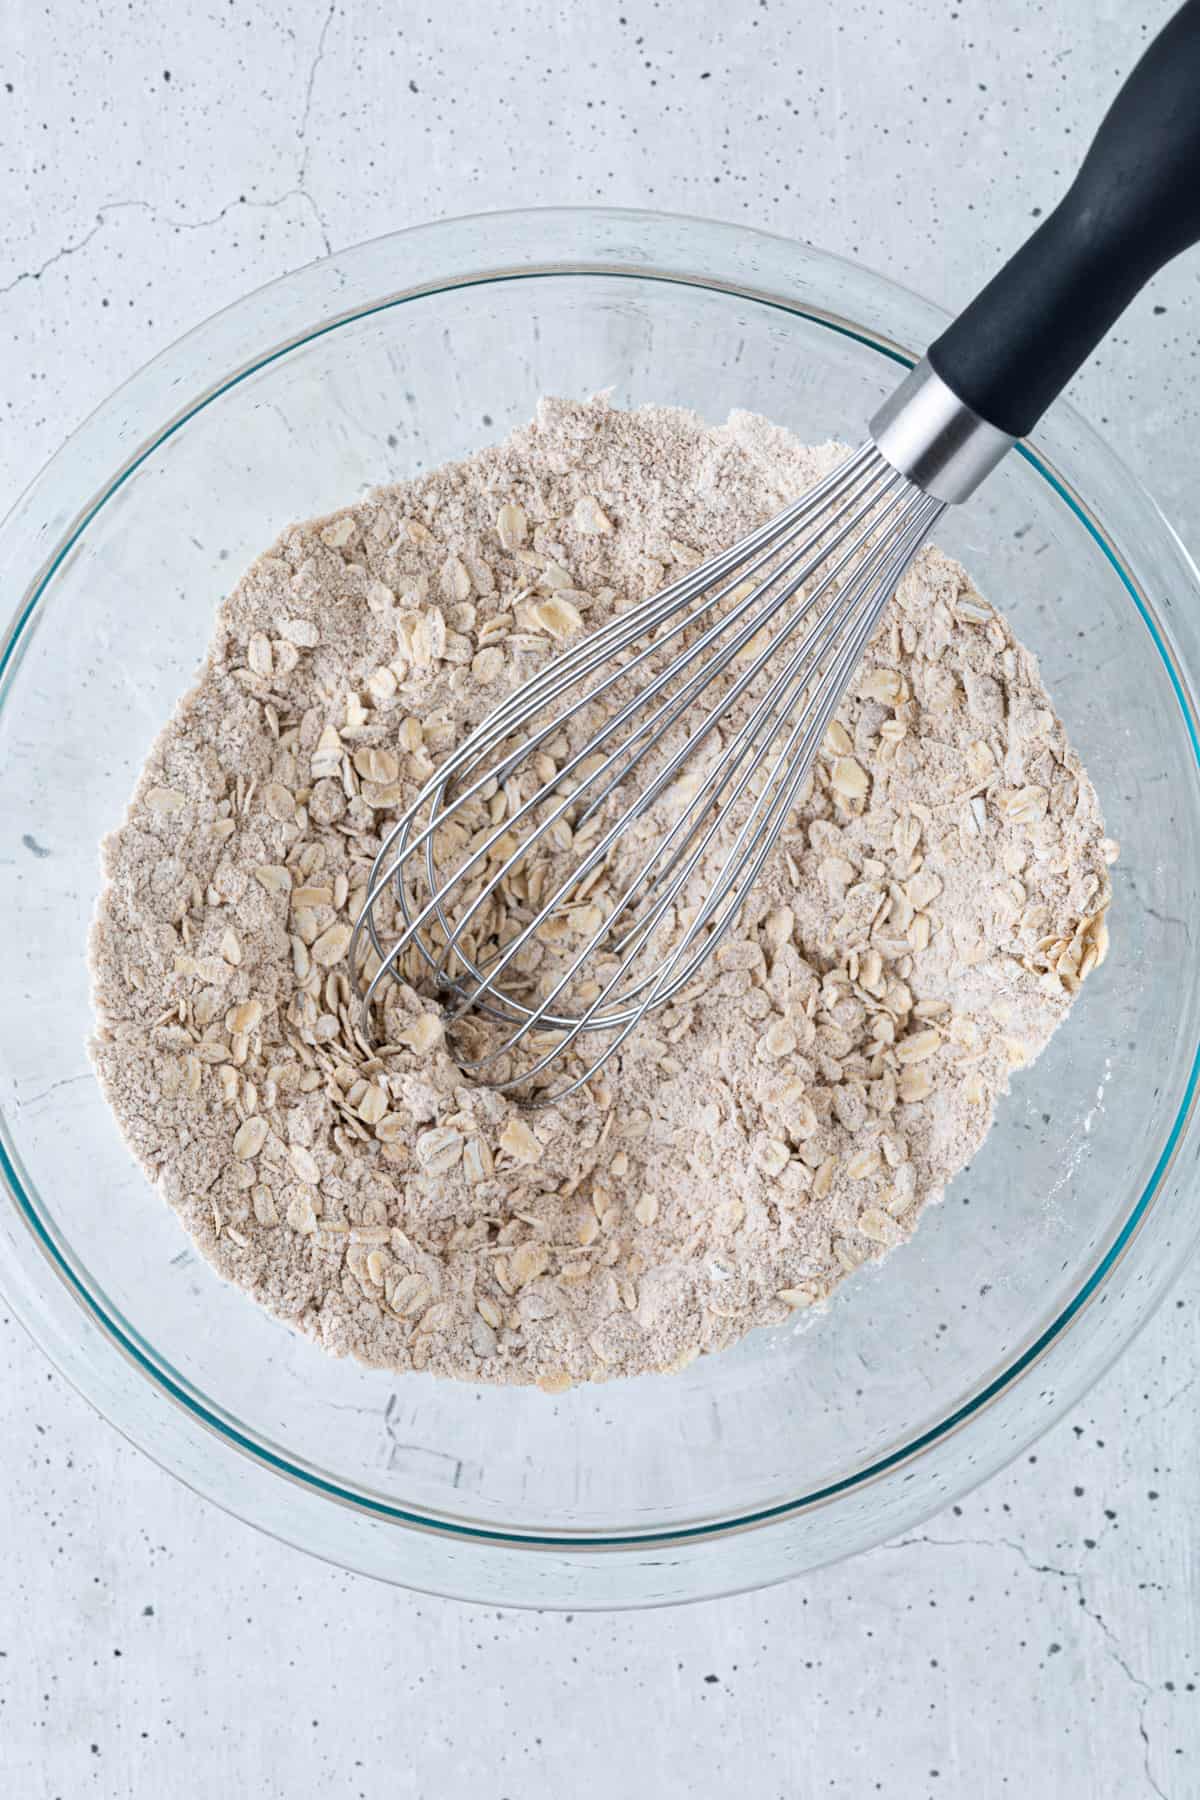 The dry ingredients in a bowl with a whisk.